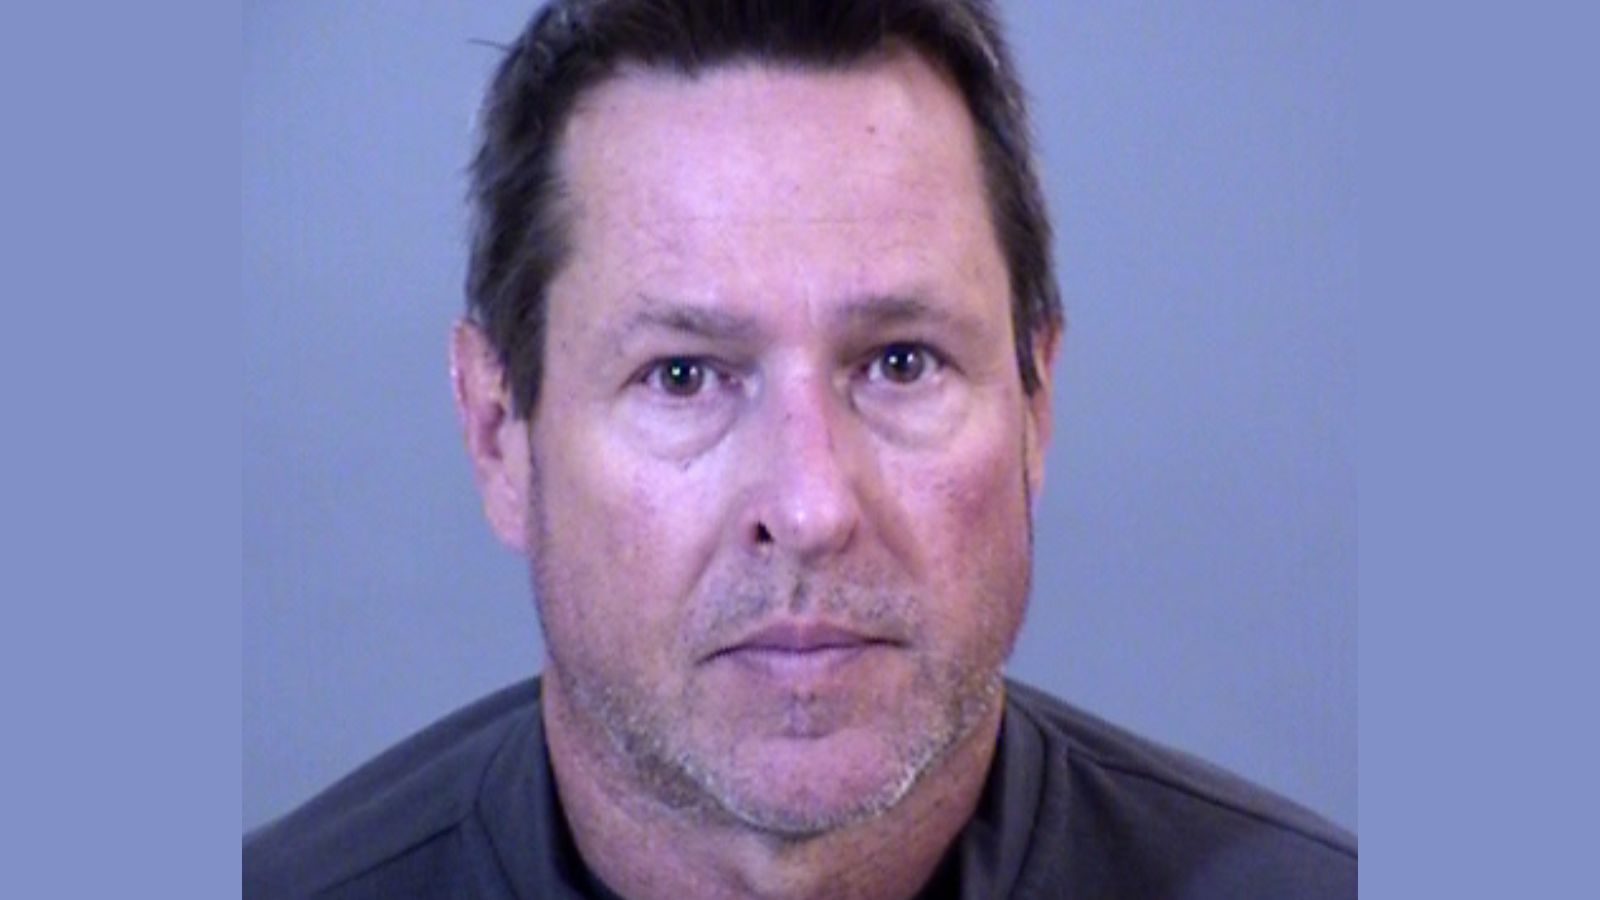 Queen Creek high school teacher arrested, accused of sharing "inappropriate image" with student